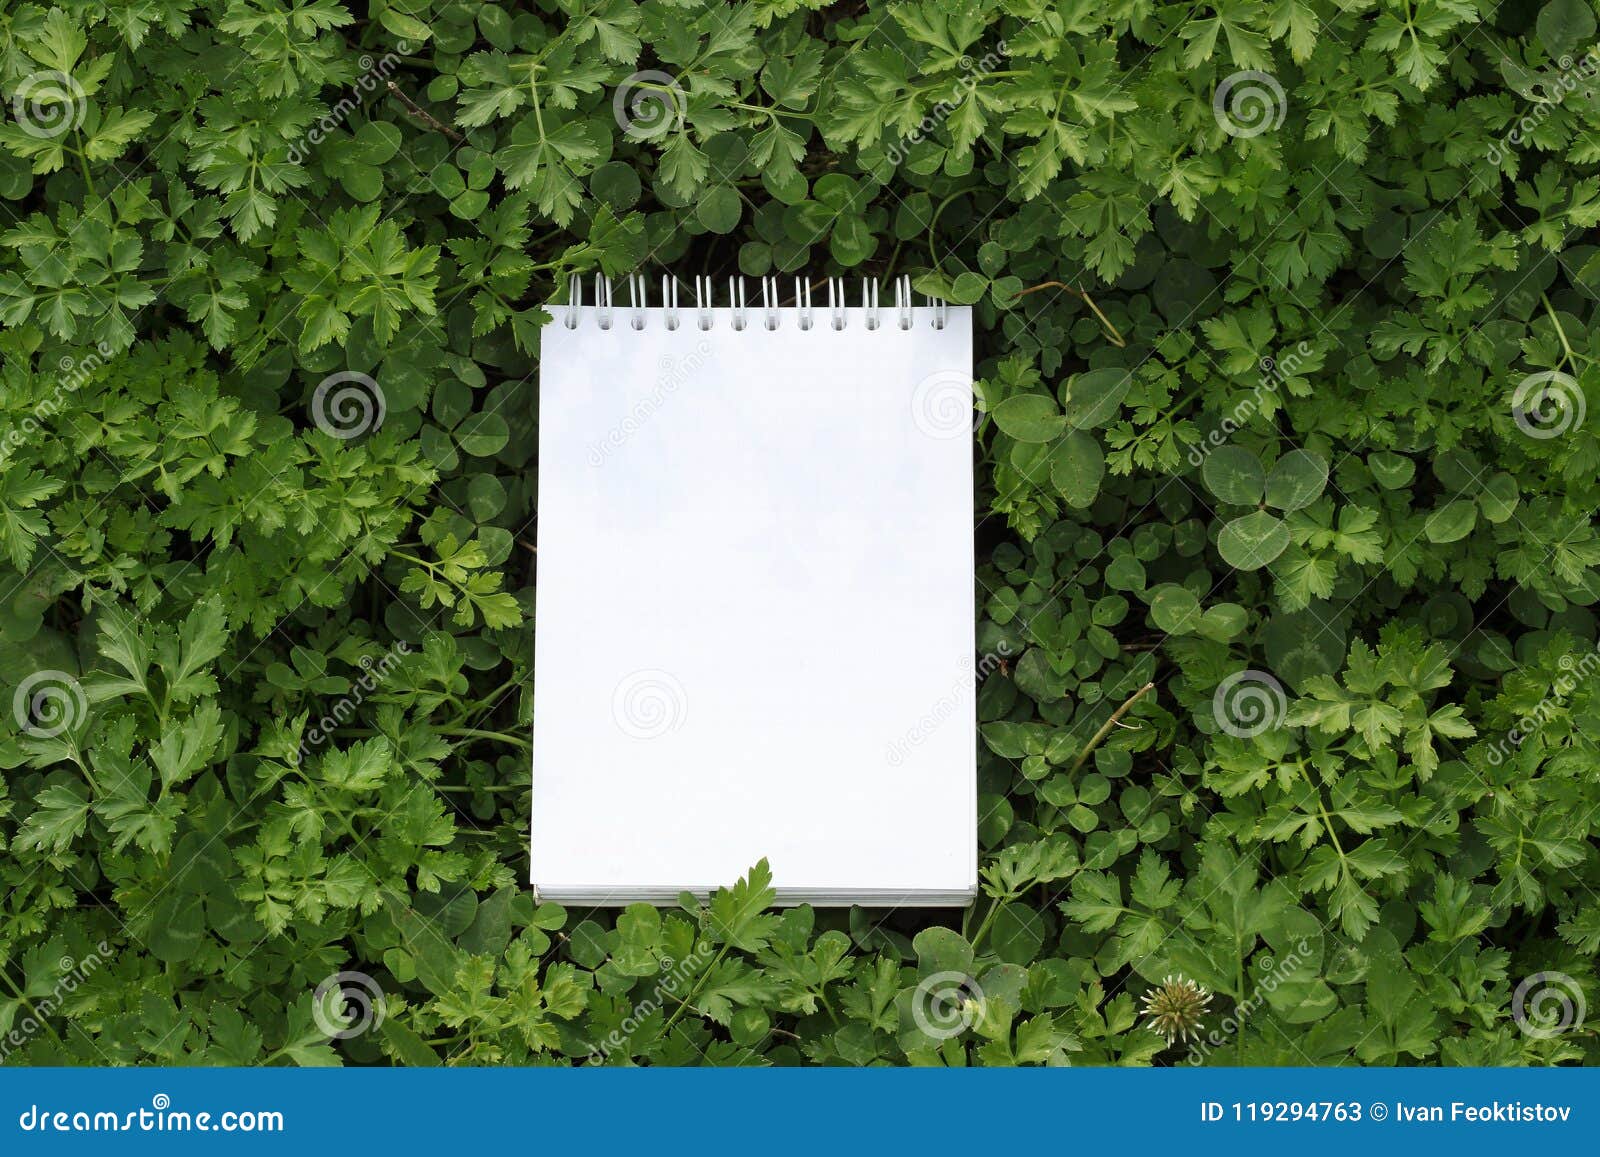 Nature Workplace stock image. Image of creative 119294763